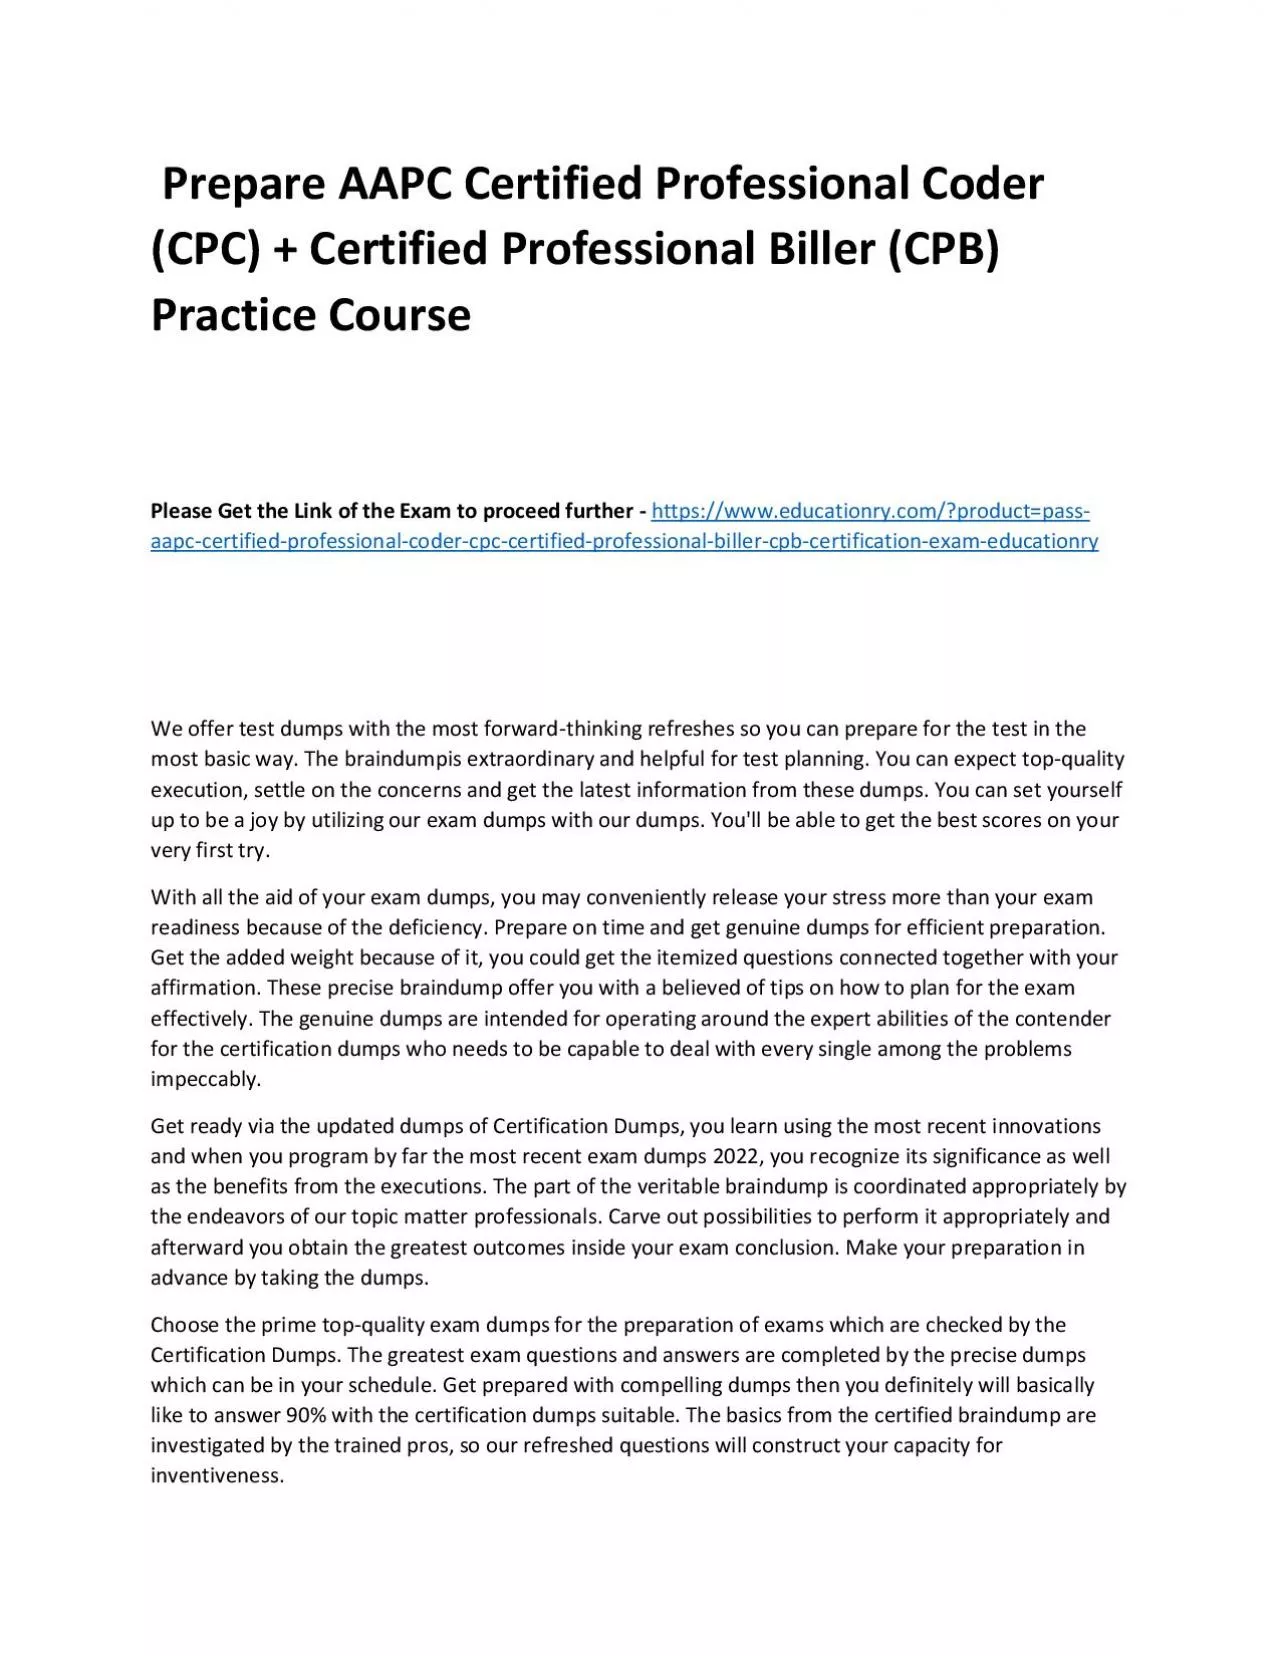 AAPC Certified Professional Coder (CPC) + Certified Professional Biller (CPB)